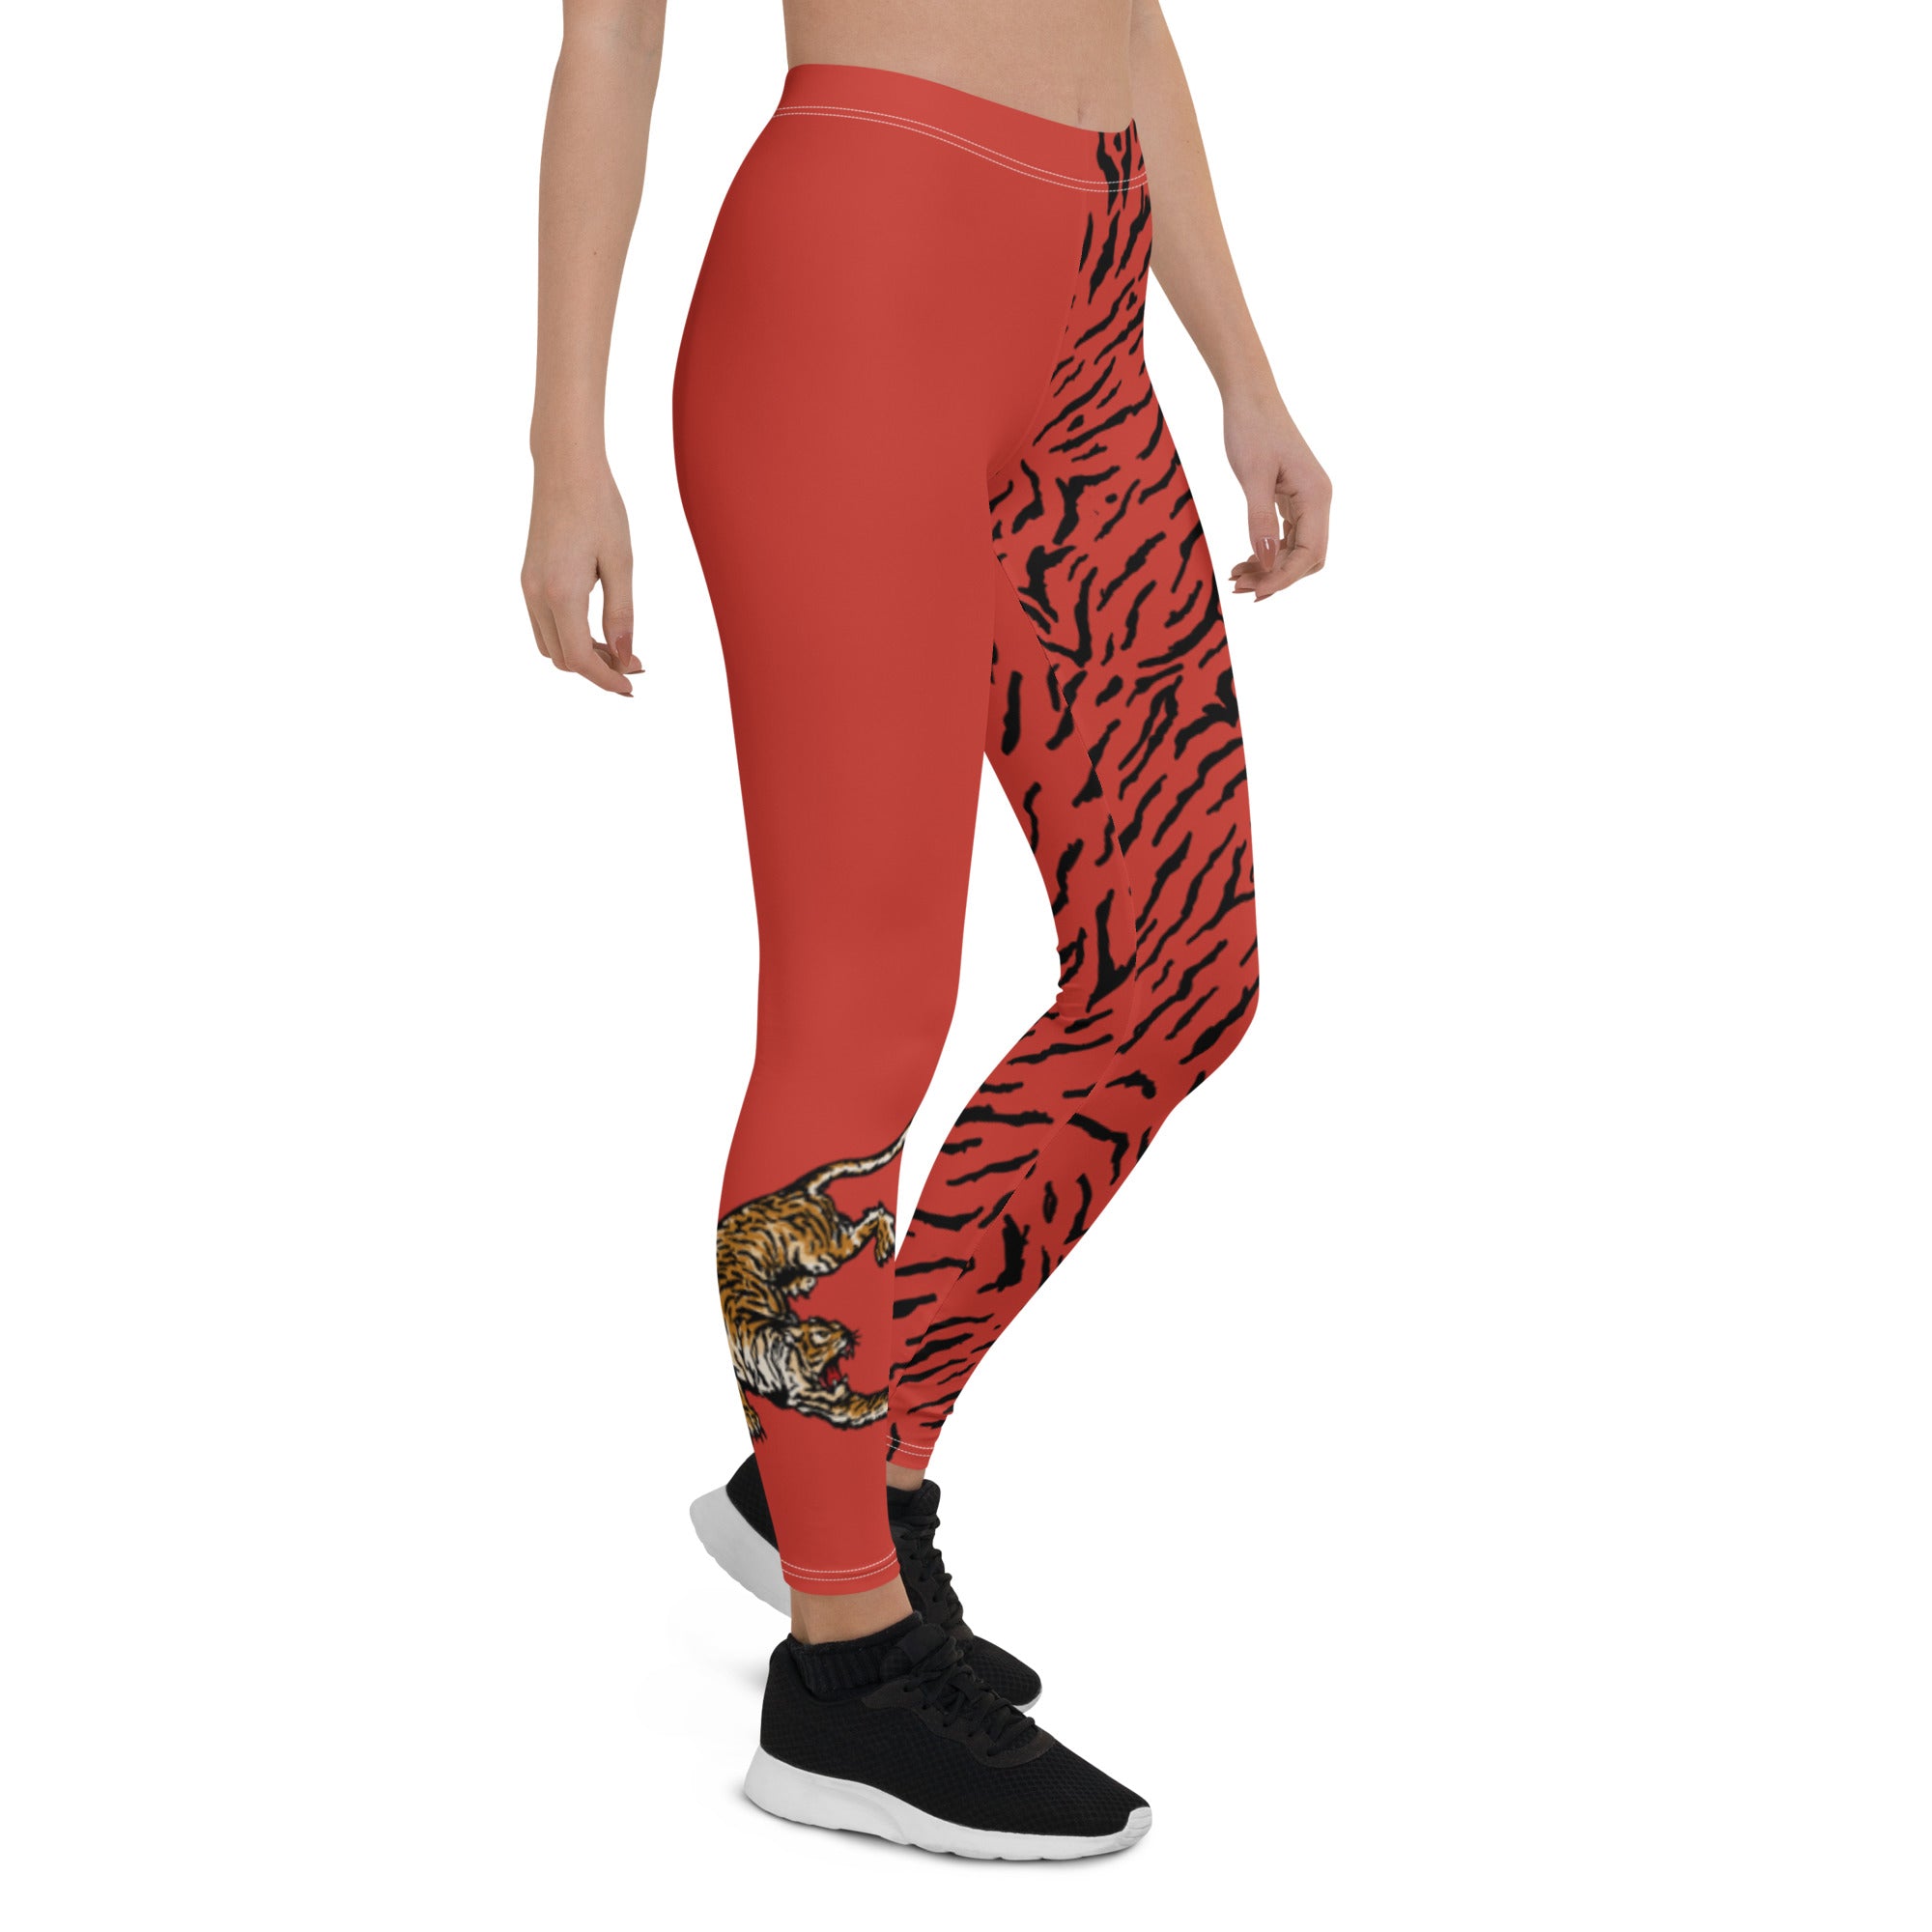 Redchief Solid Slim Fit Track Pant : Amazon.in: Clothing & Accessories